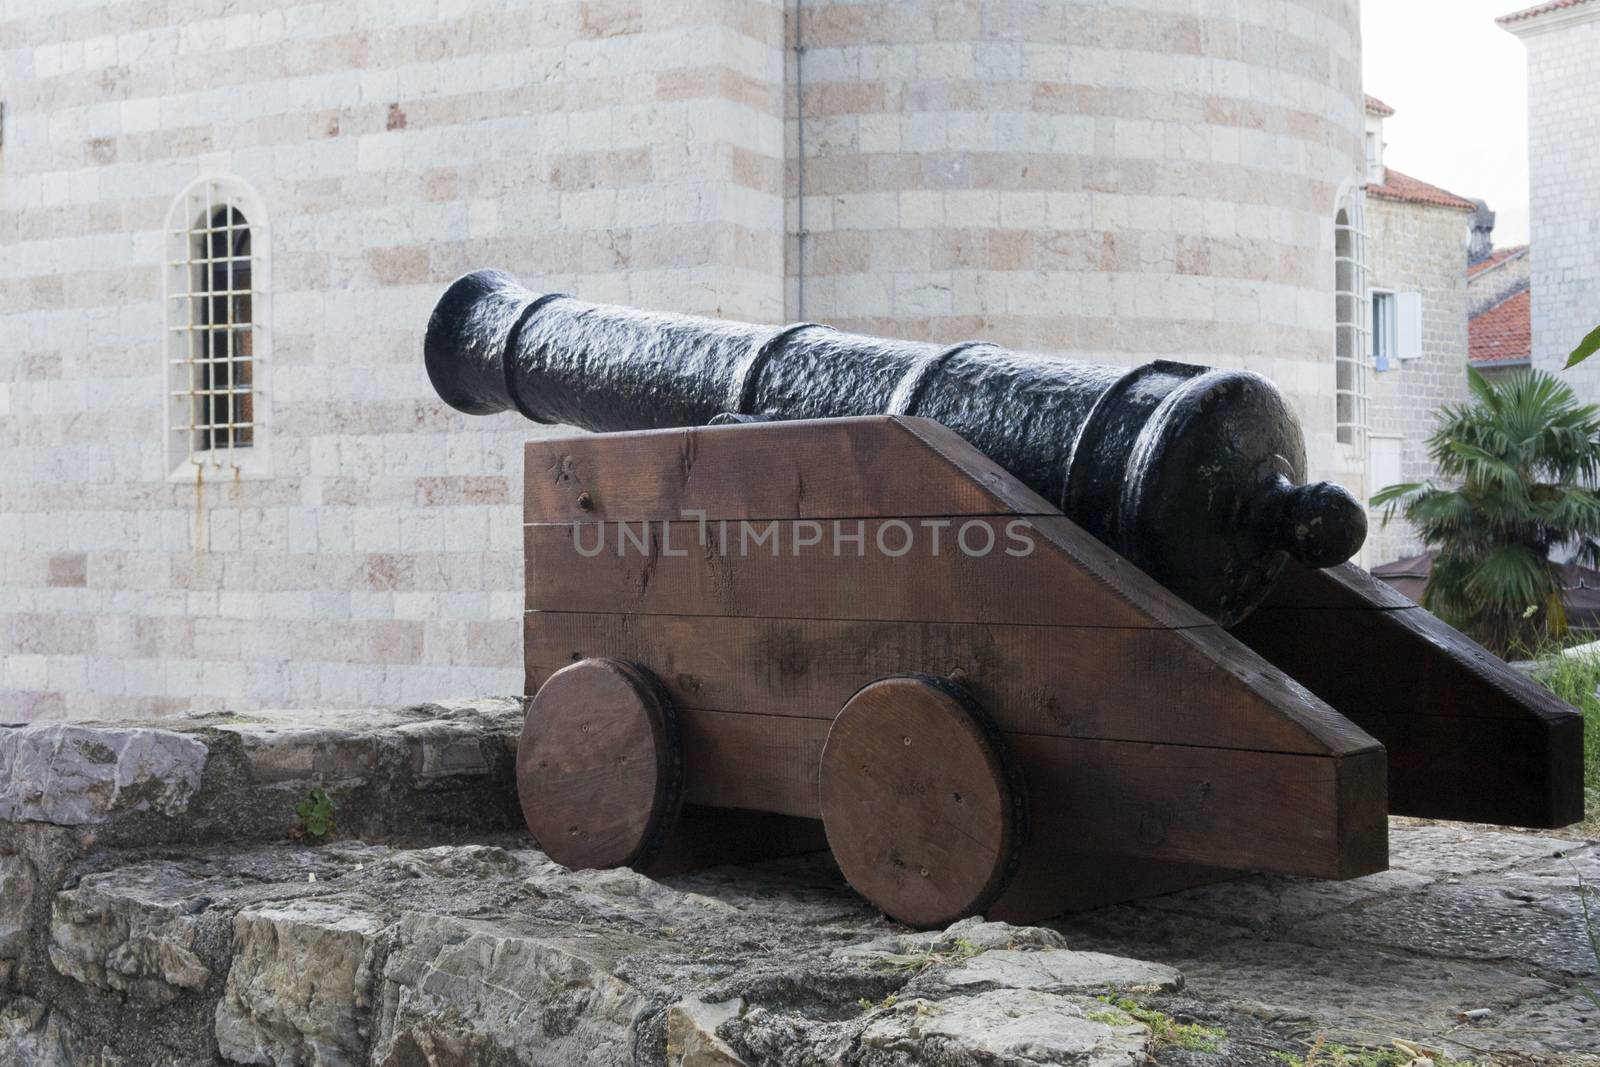 small cannon at the place of old Fort in Old city of Budva in Montenegro